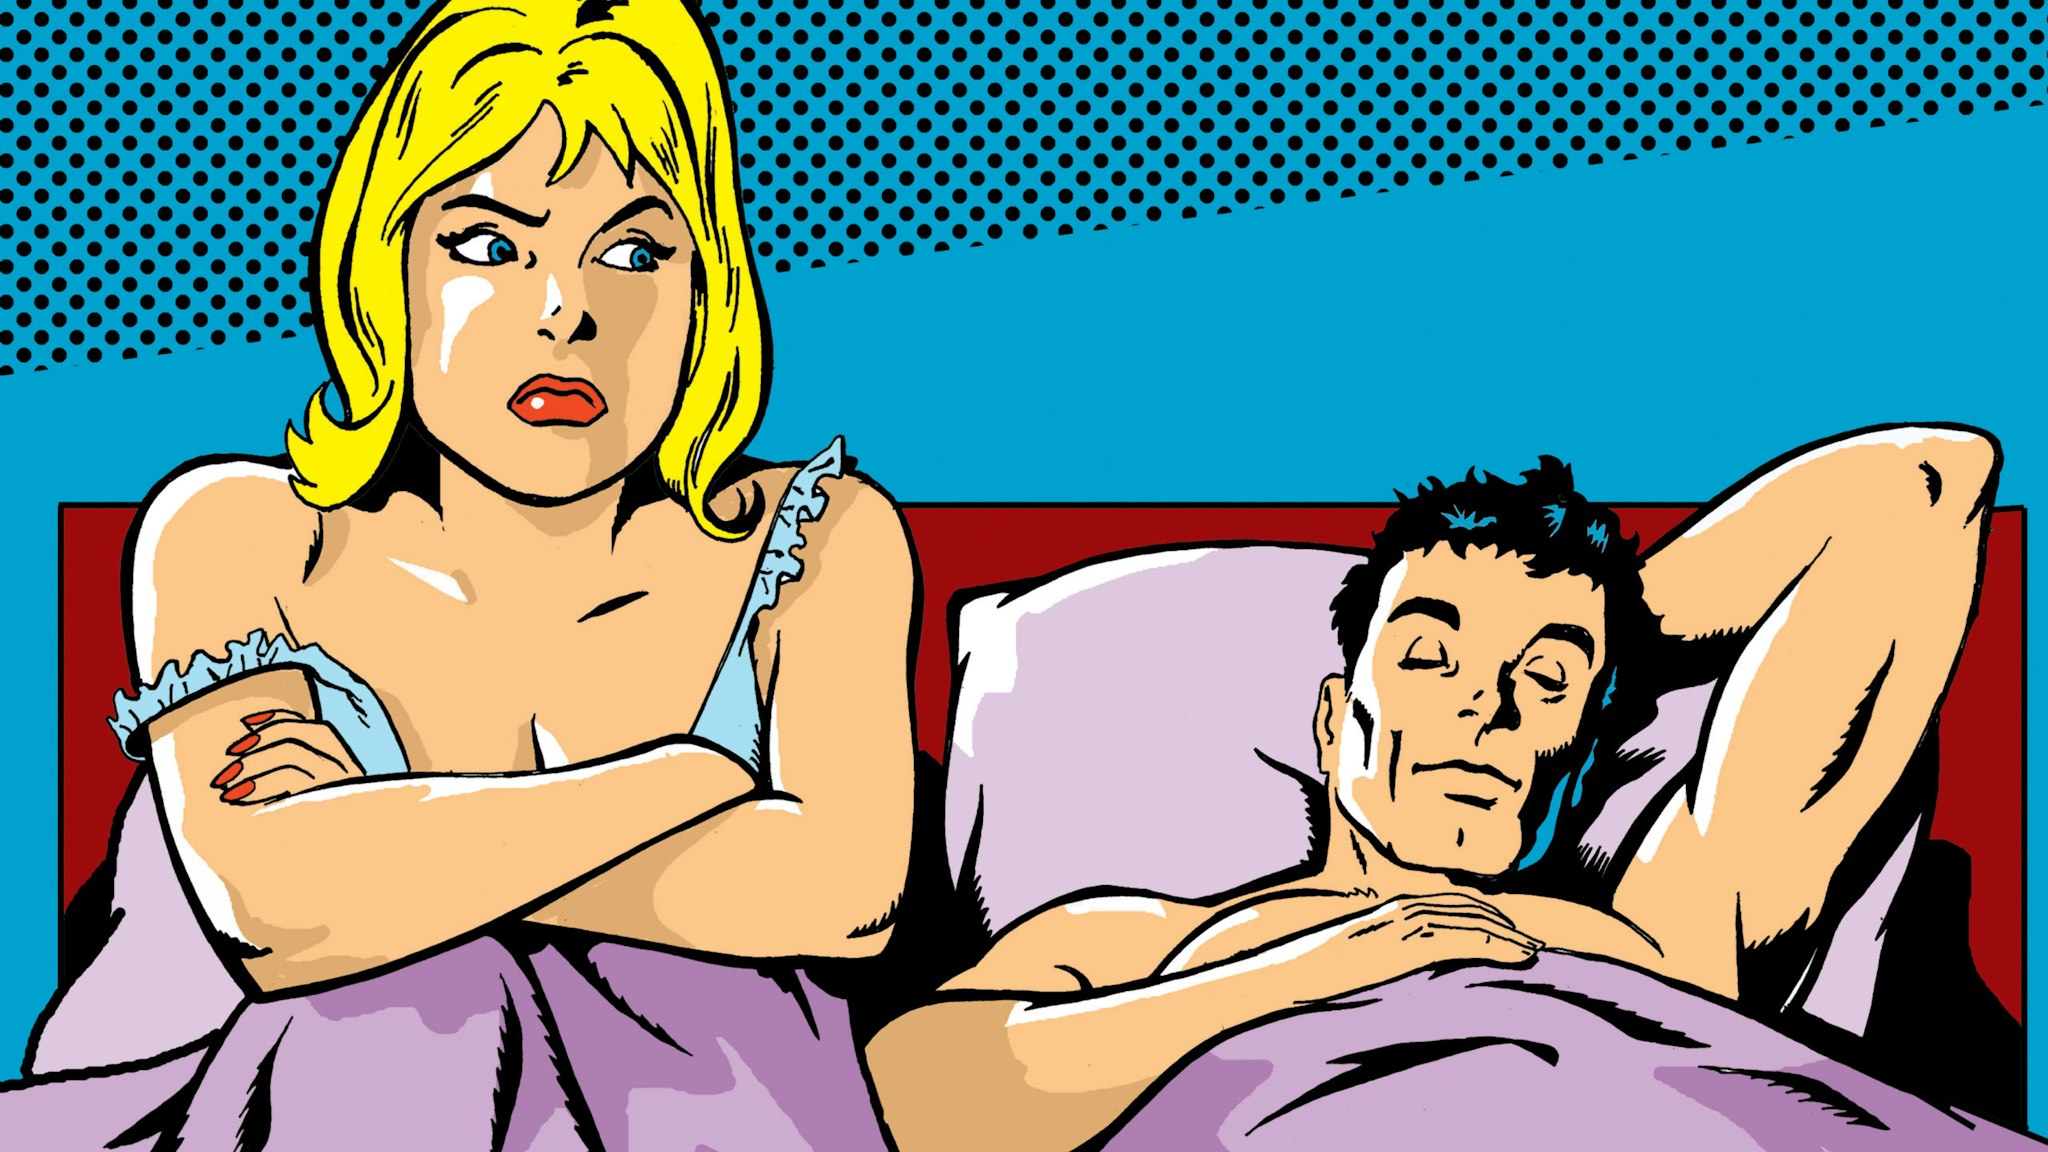 Woman Sitting in Bed With Her Arms Crossed As a Man Sleeps - stock illustration